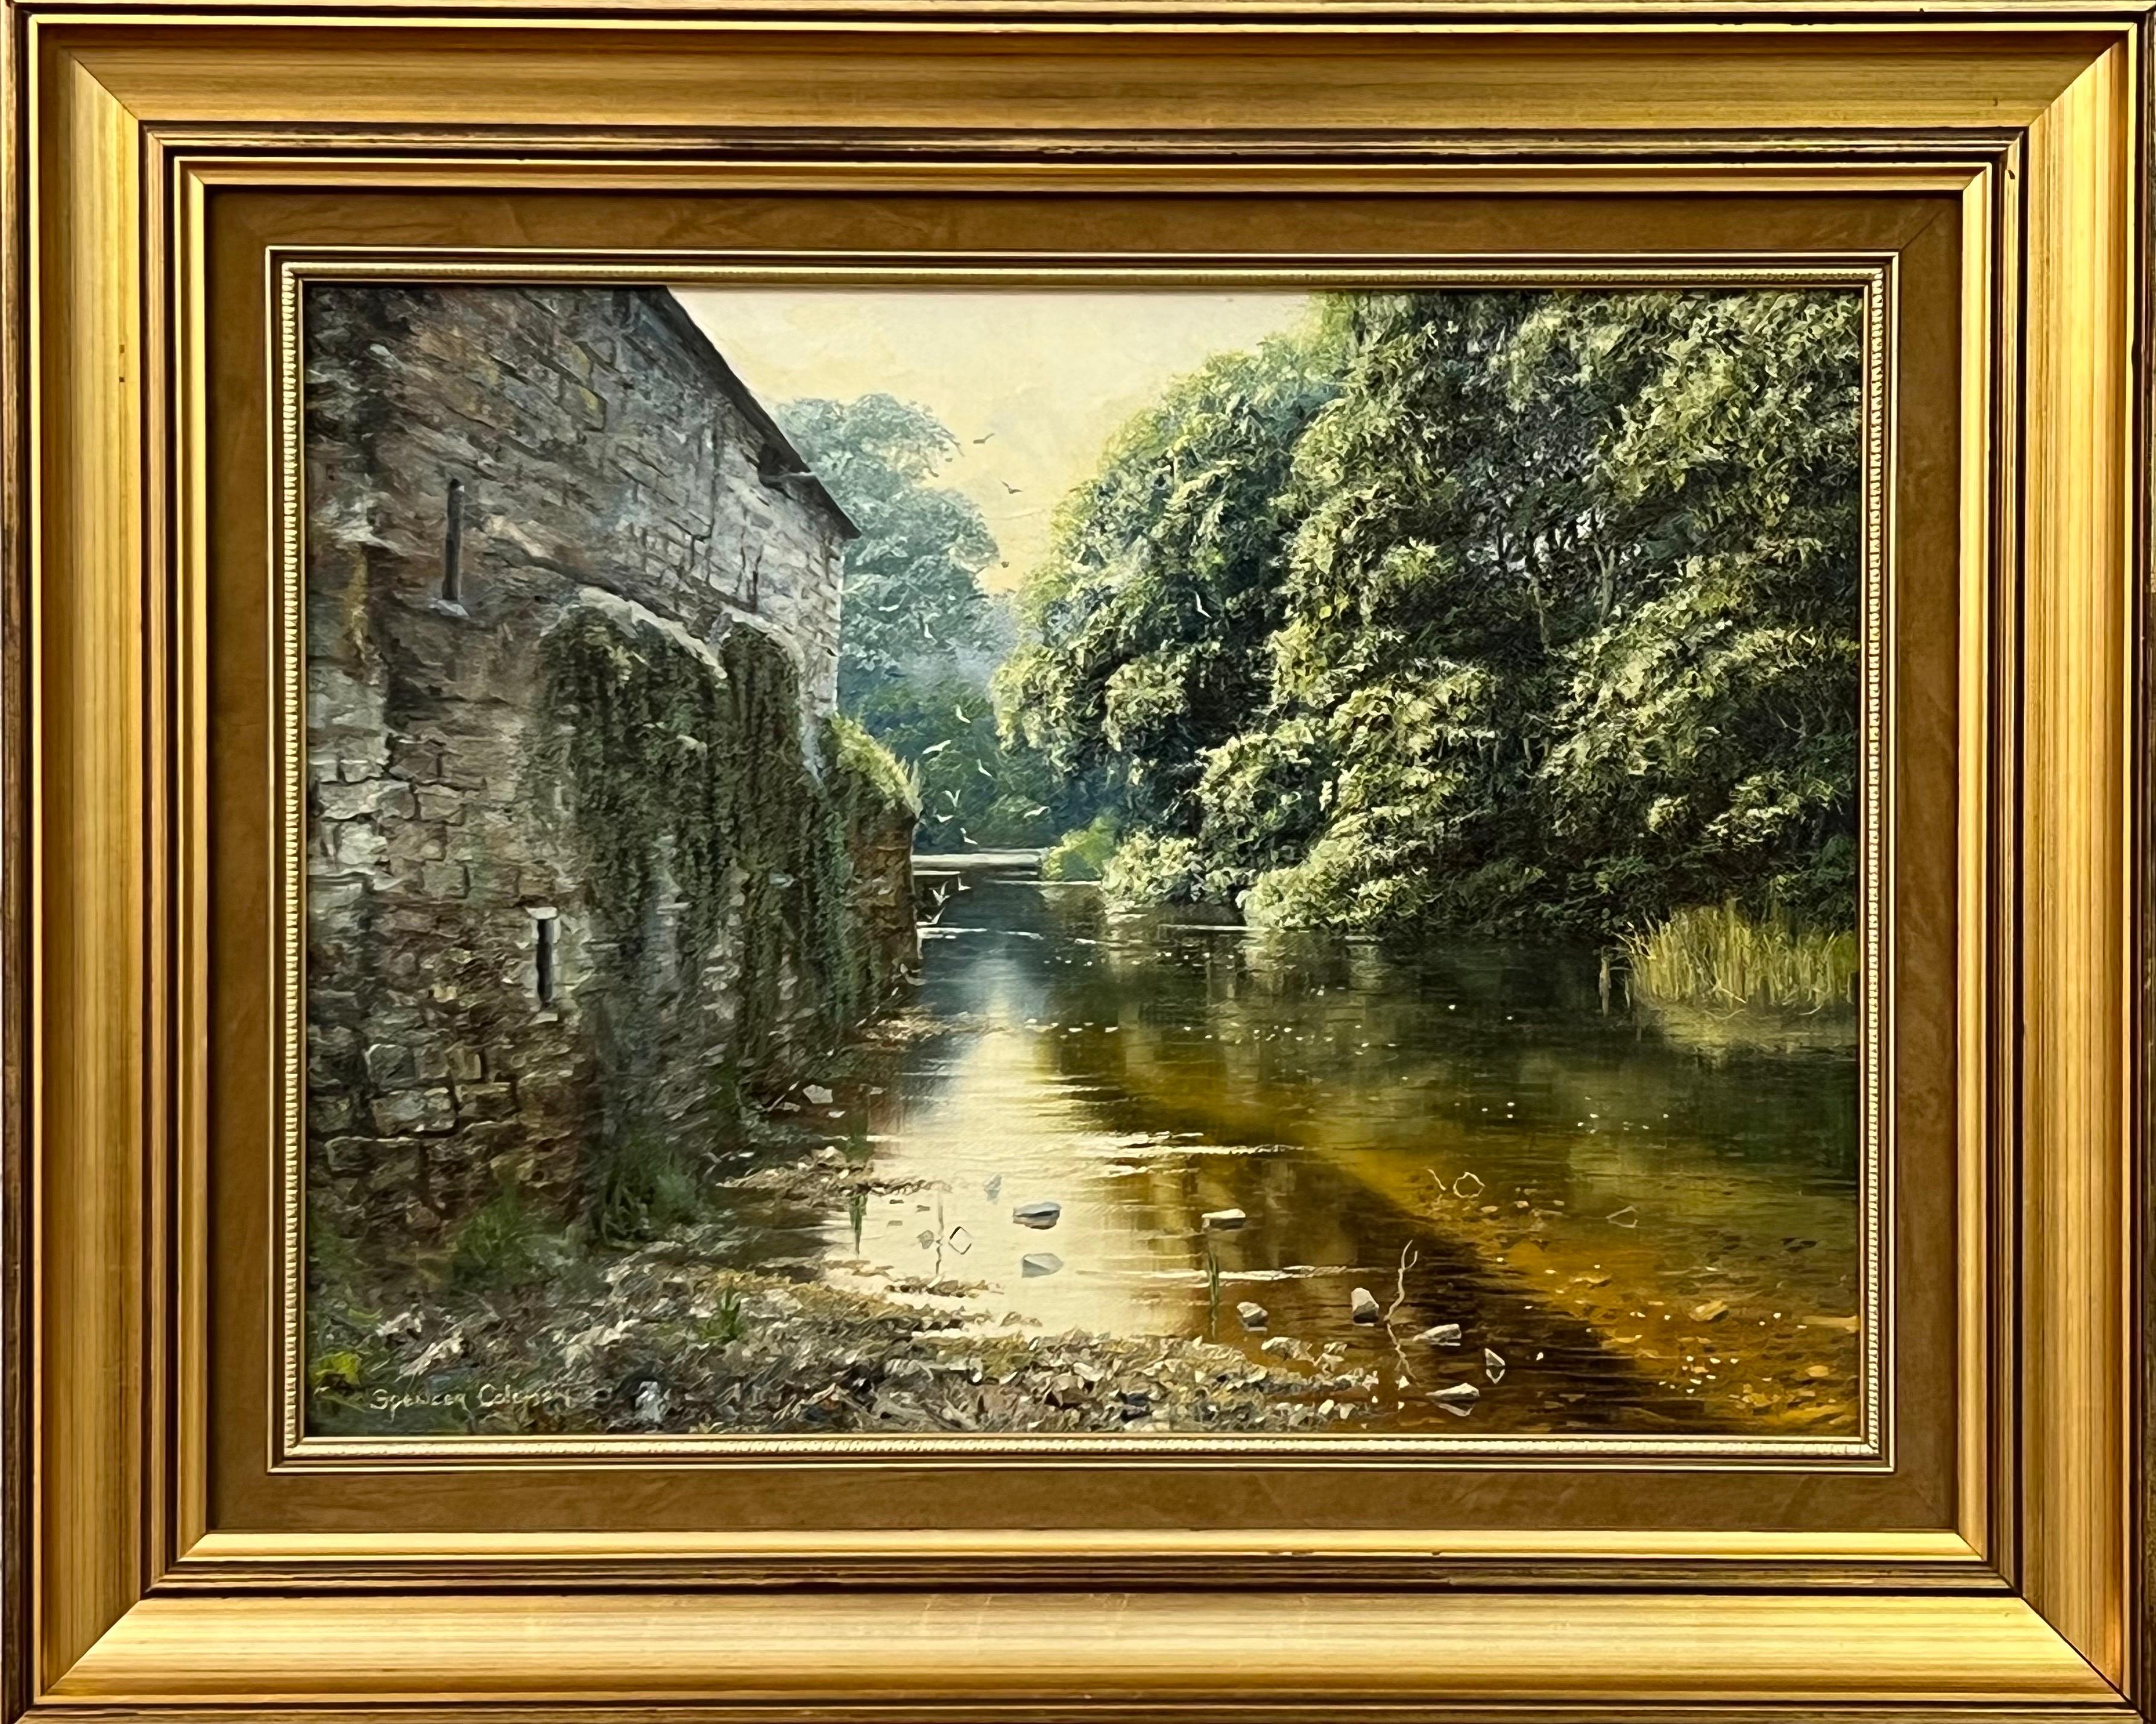 Painting of a Beautiful Rural Countryside River Scene with Birds in Ireland - Brown Animal Painting by Spencer Coleman